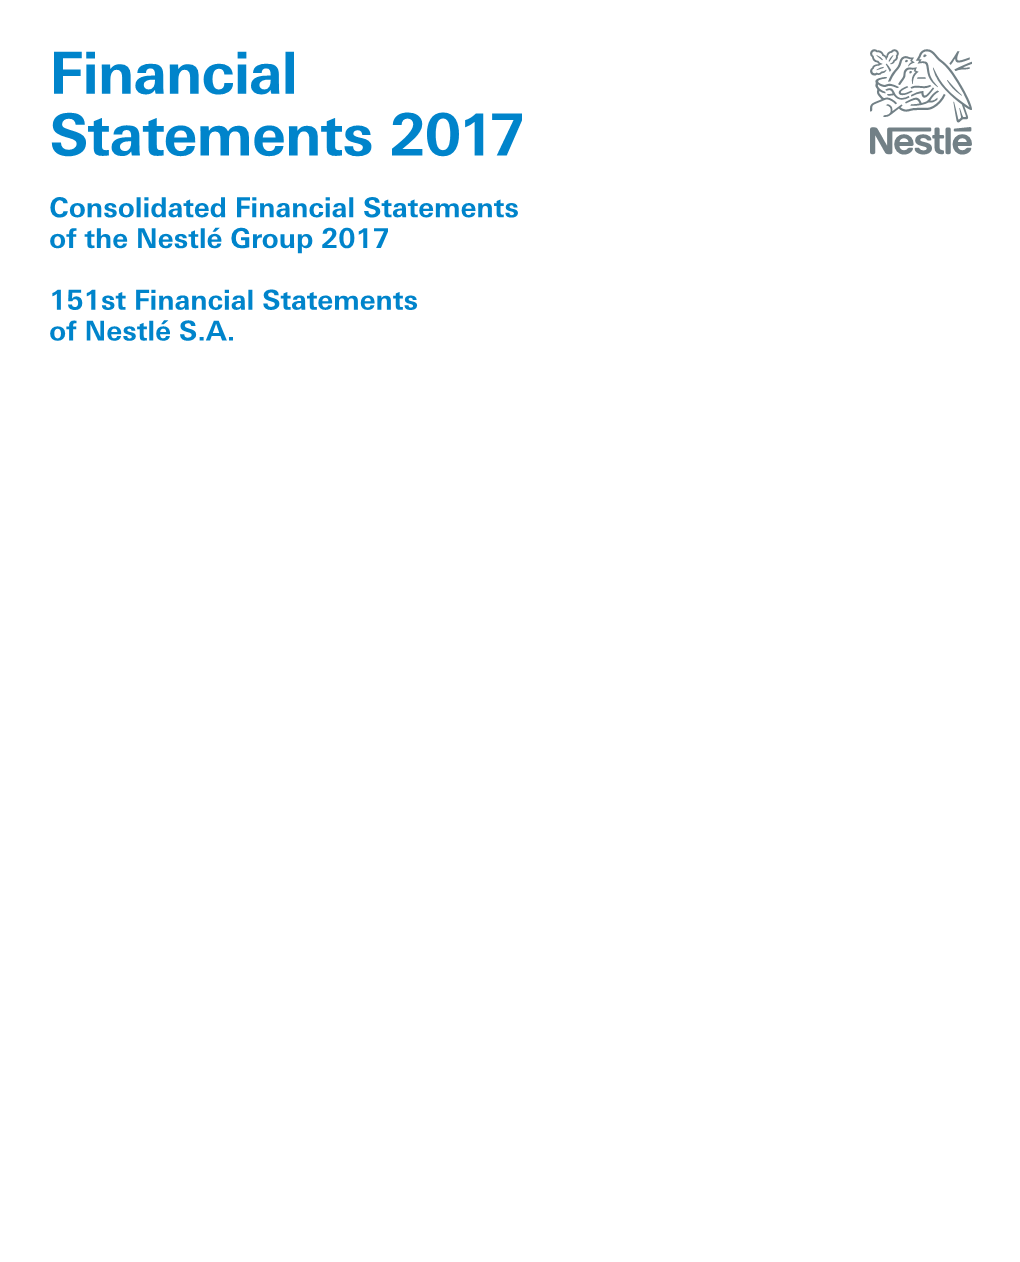 Consolidated Financial Statements of the Nestlé Group 2017